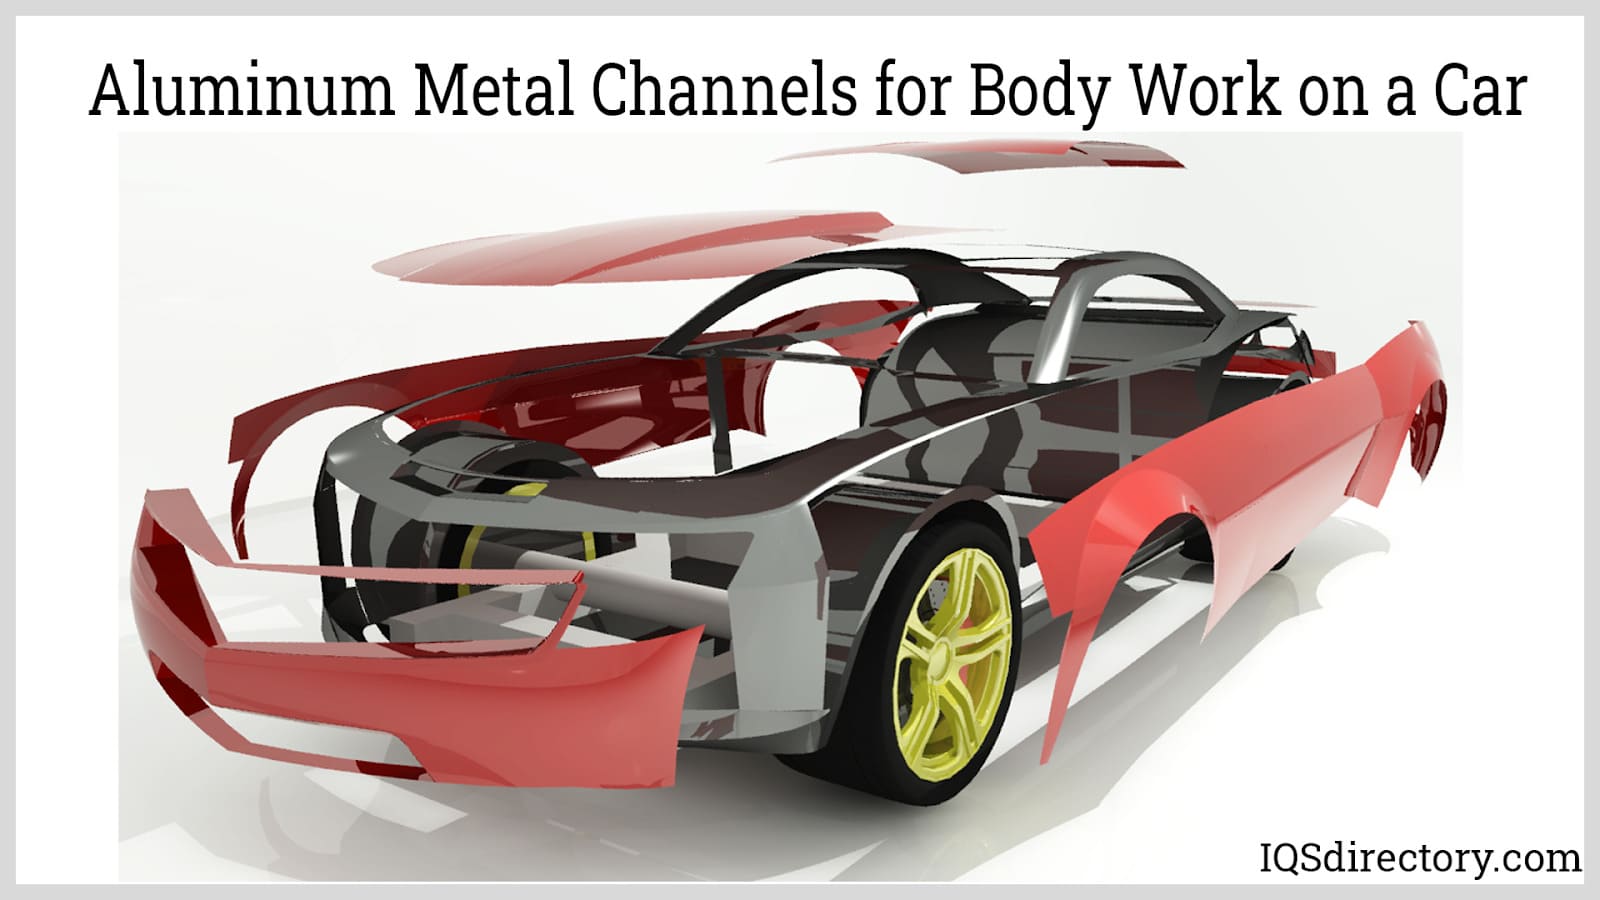 Aluminum Metal Channels for Body Work on a Car